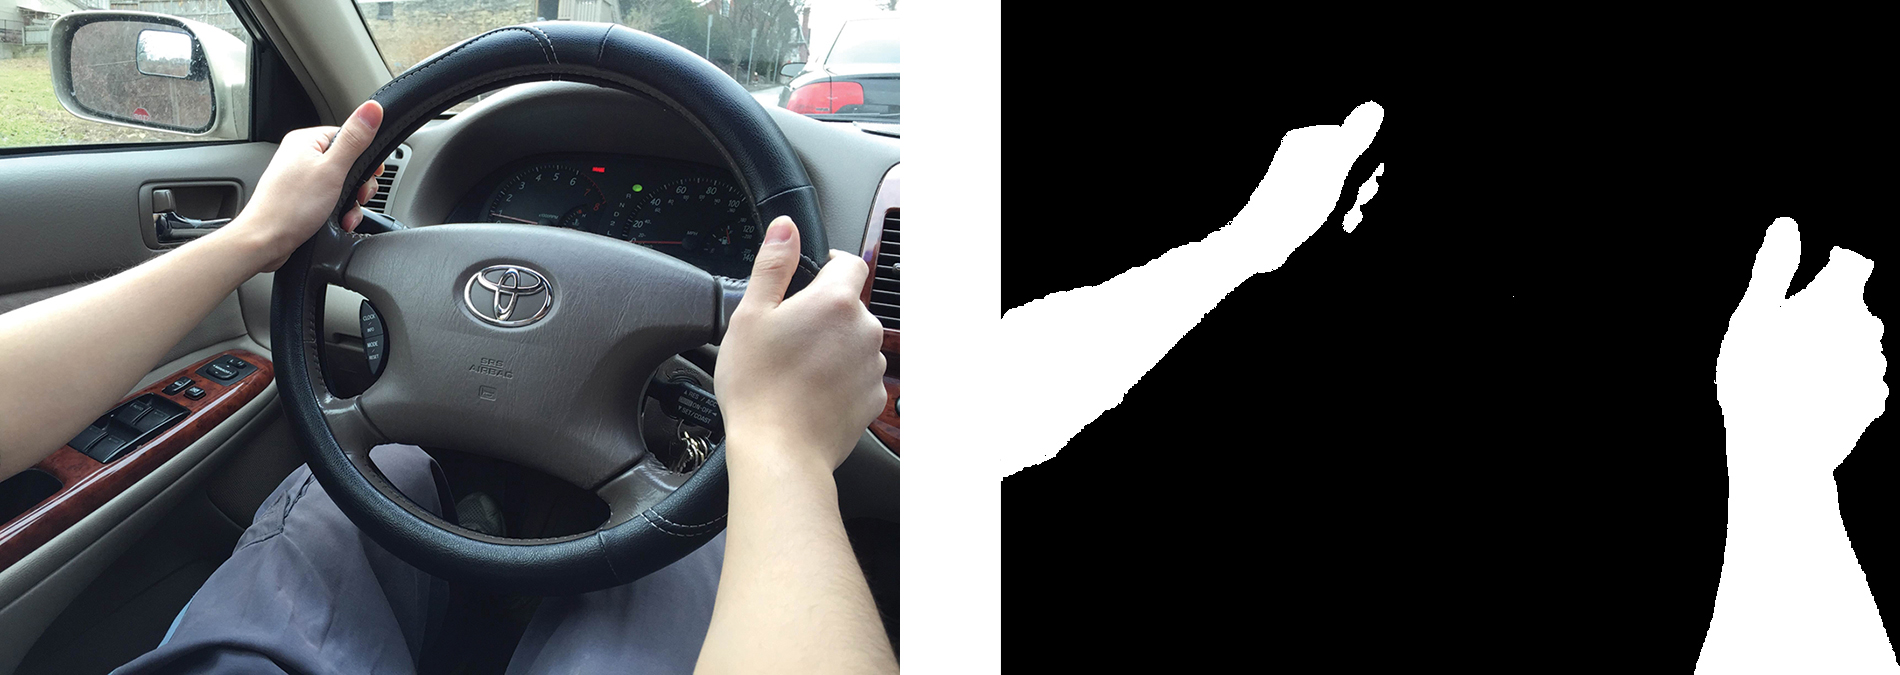 On the left is a photograph of a pair of hands on a steering wheel inside a car; on the right is a black-and-white image of the same hands.